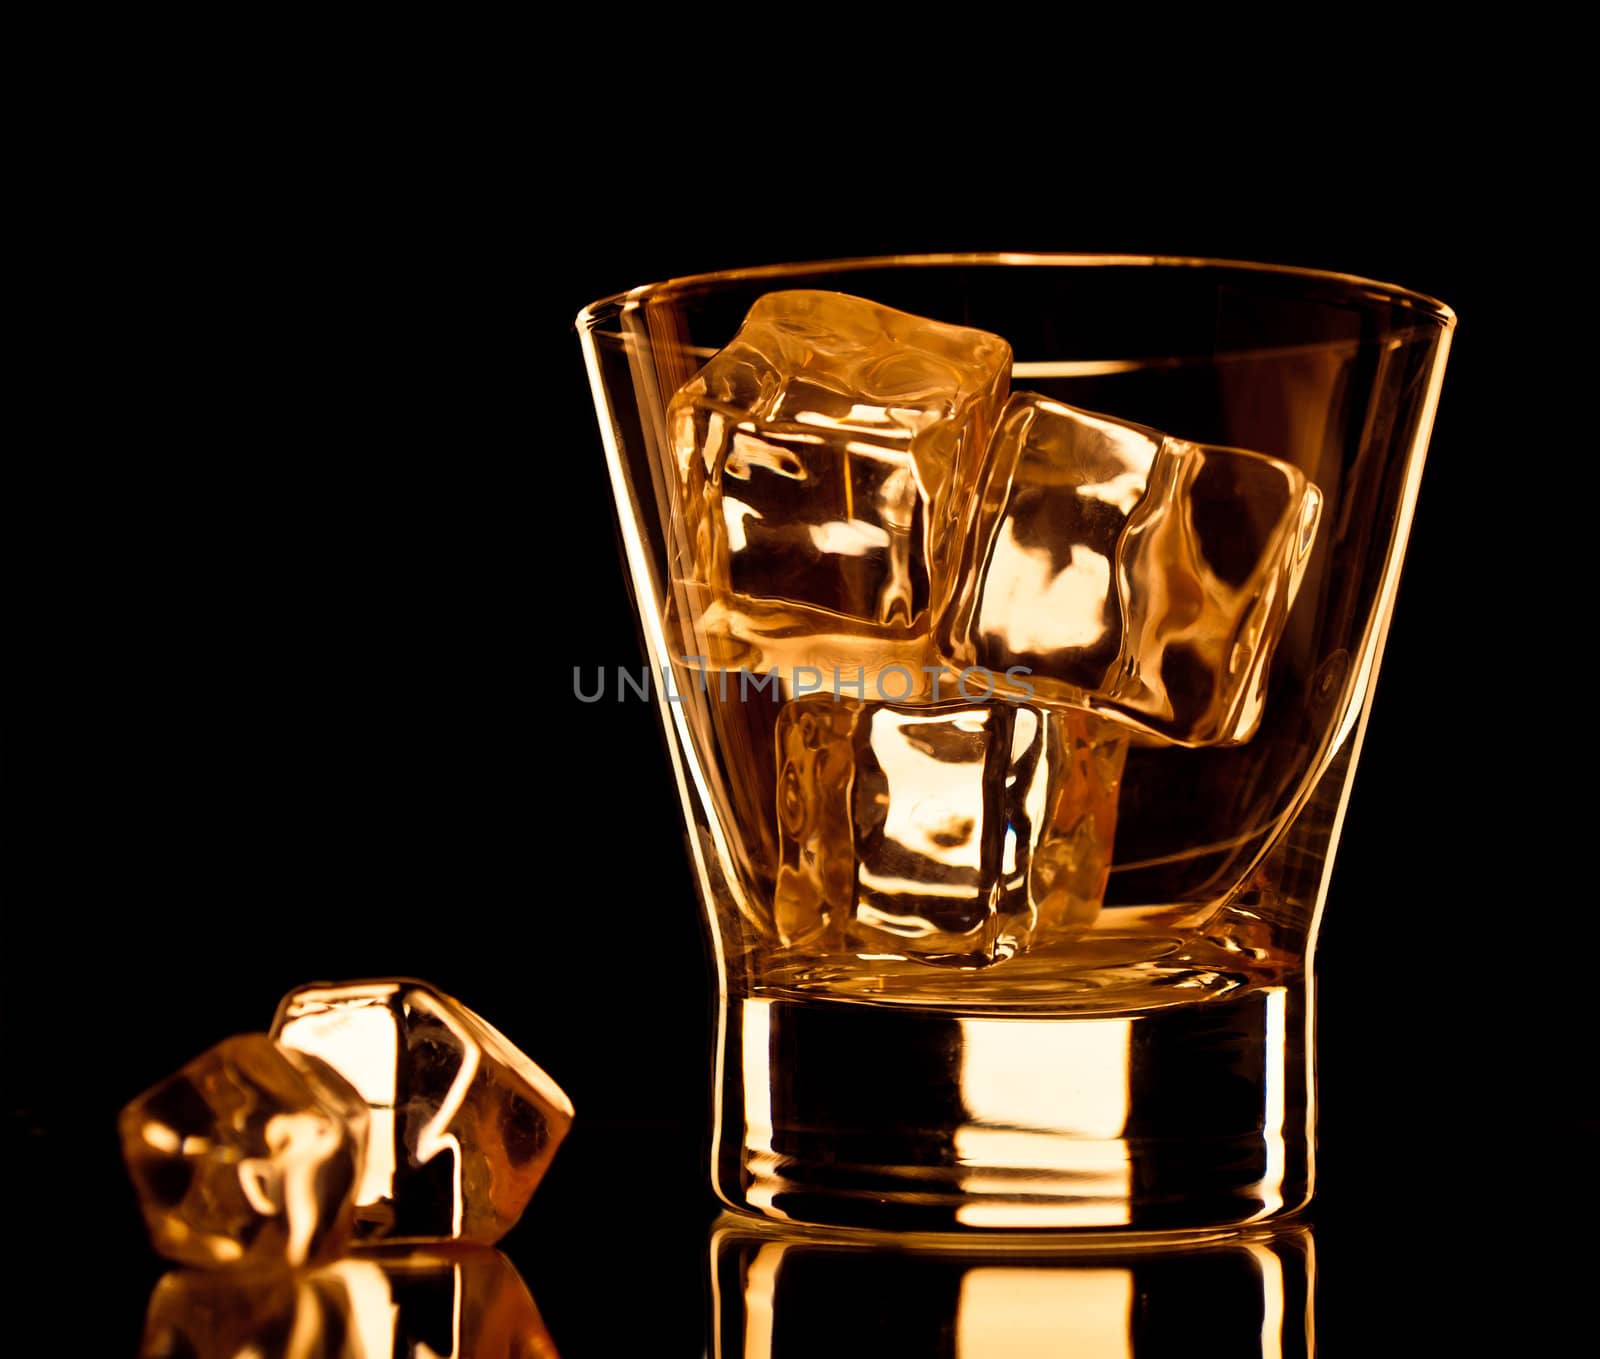 Empty whiskey glass with ice cubes on black background